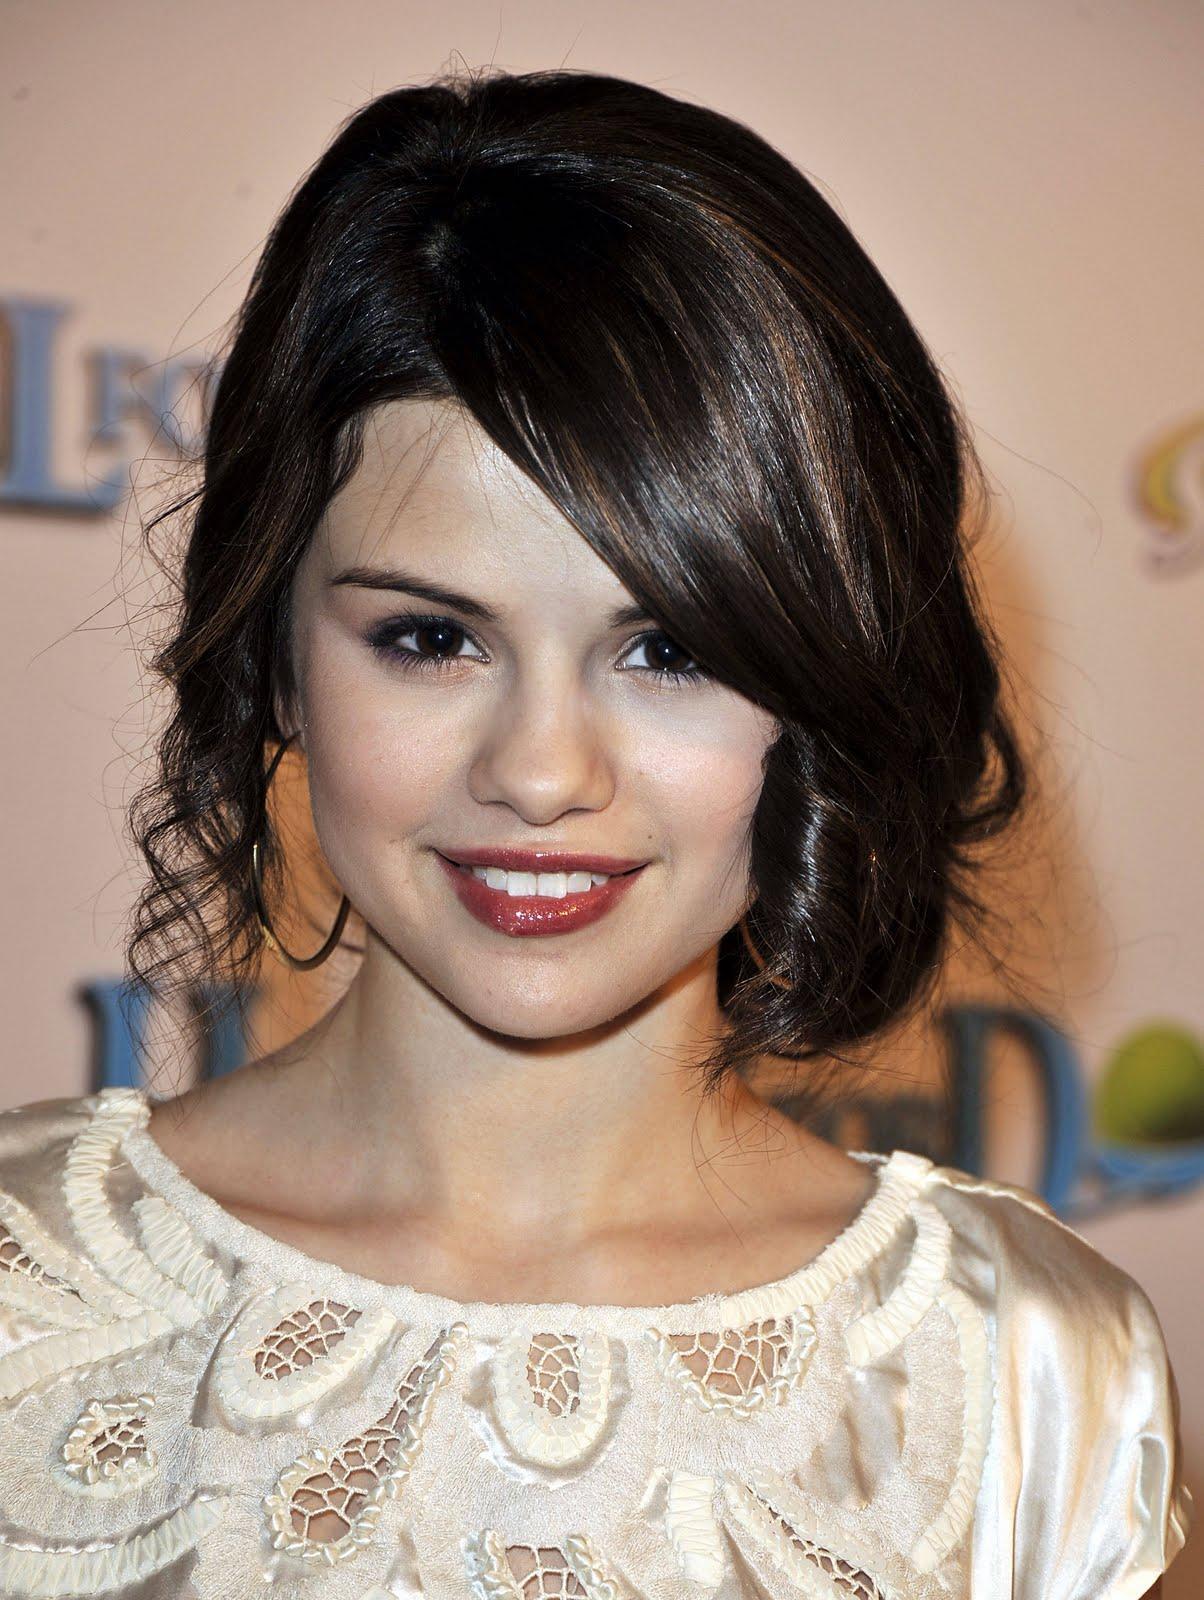 Hairstyle Review and Picture: Selena Gomez Hairstyles Wallpaper